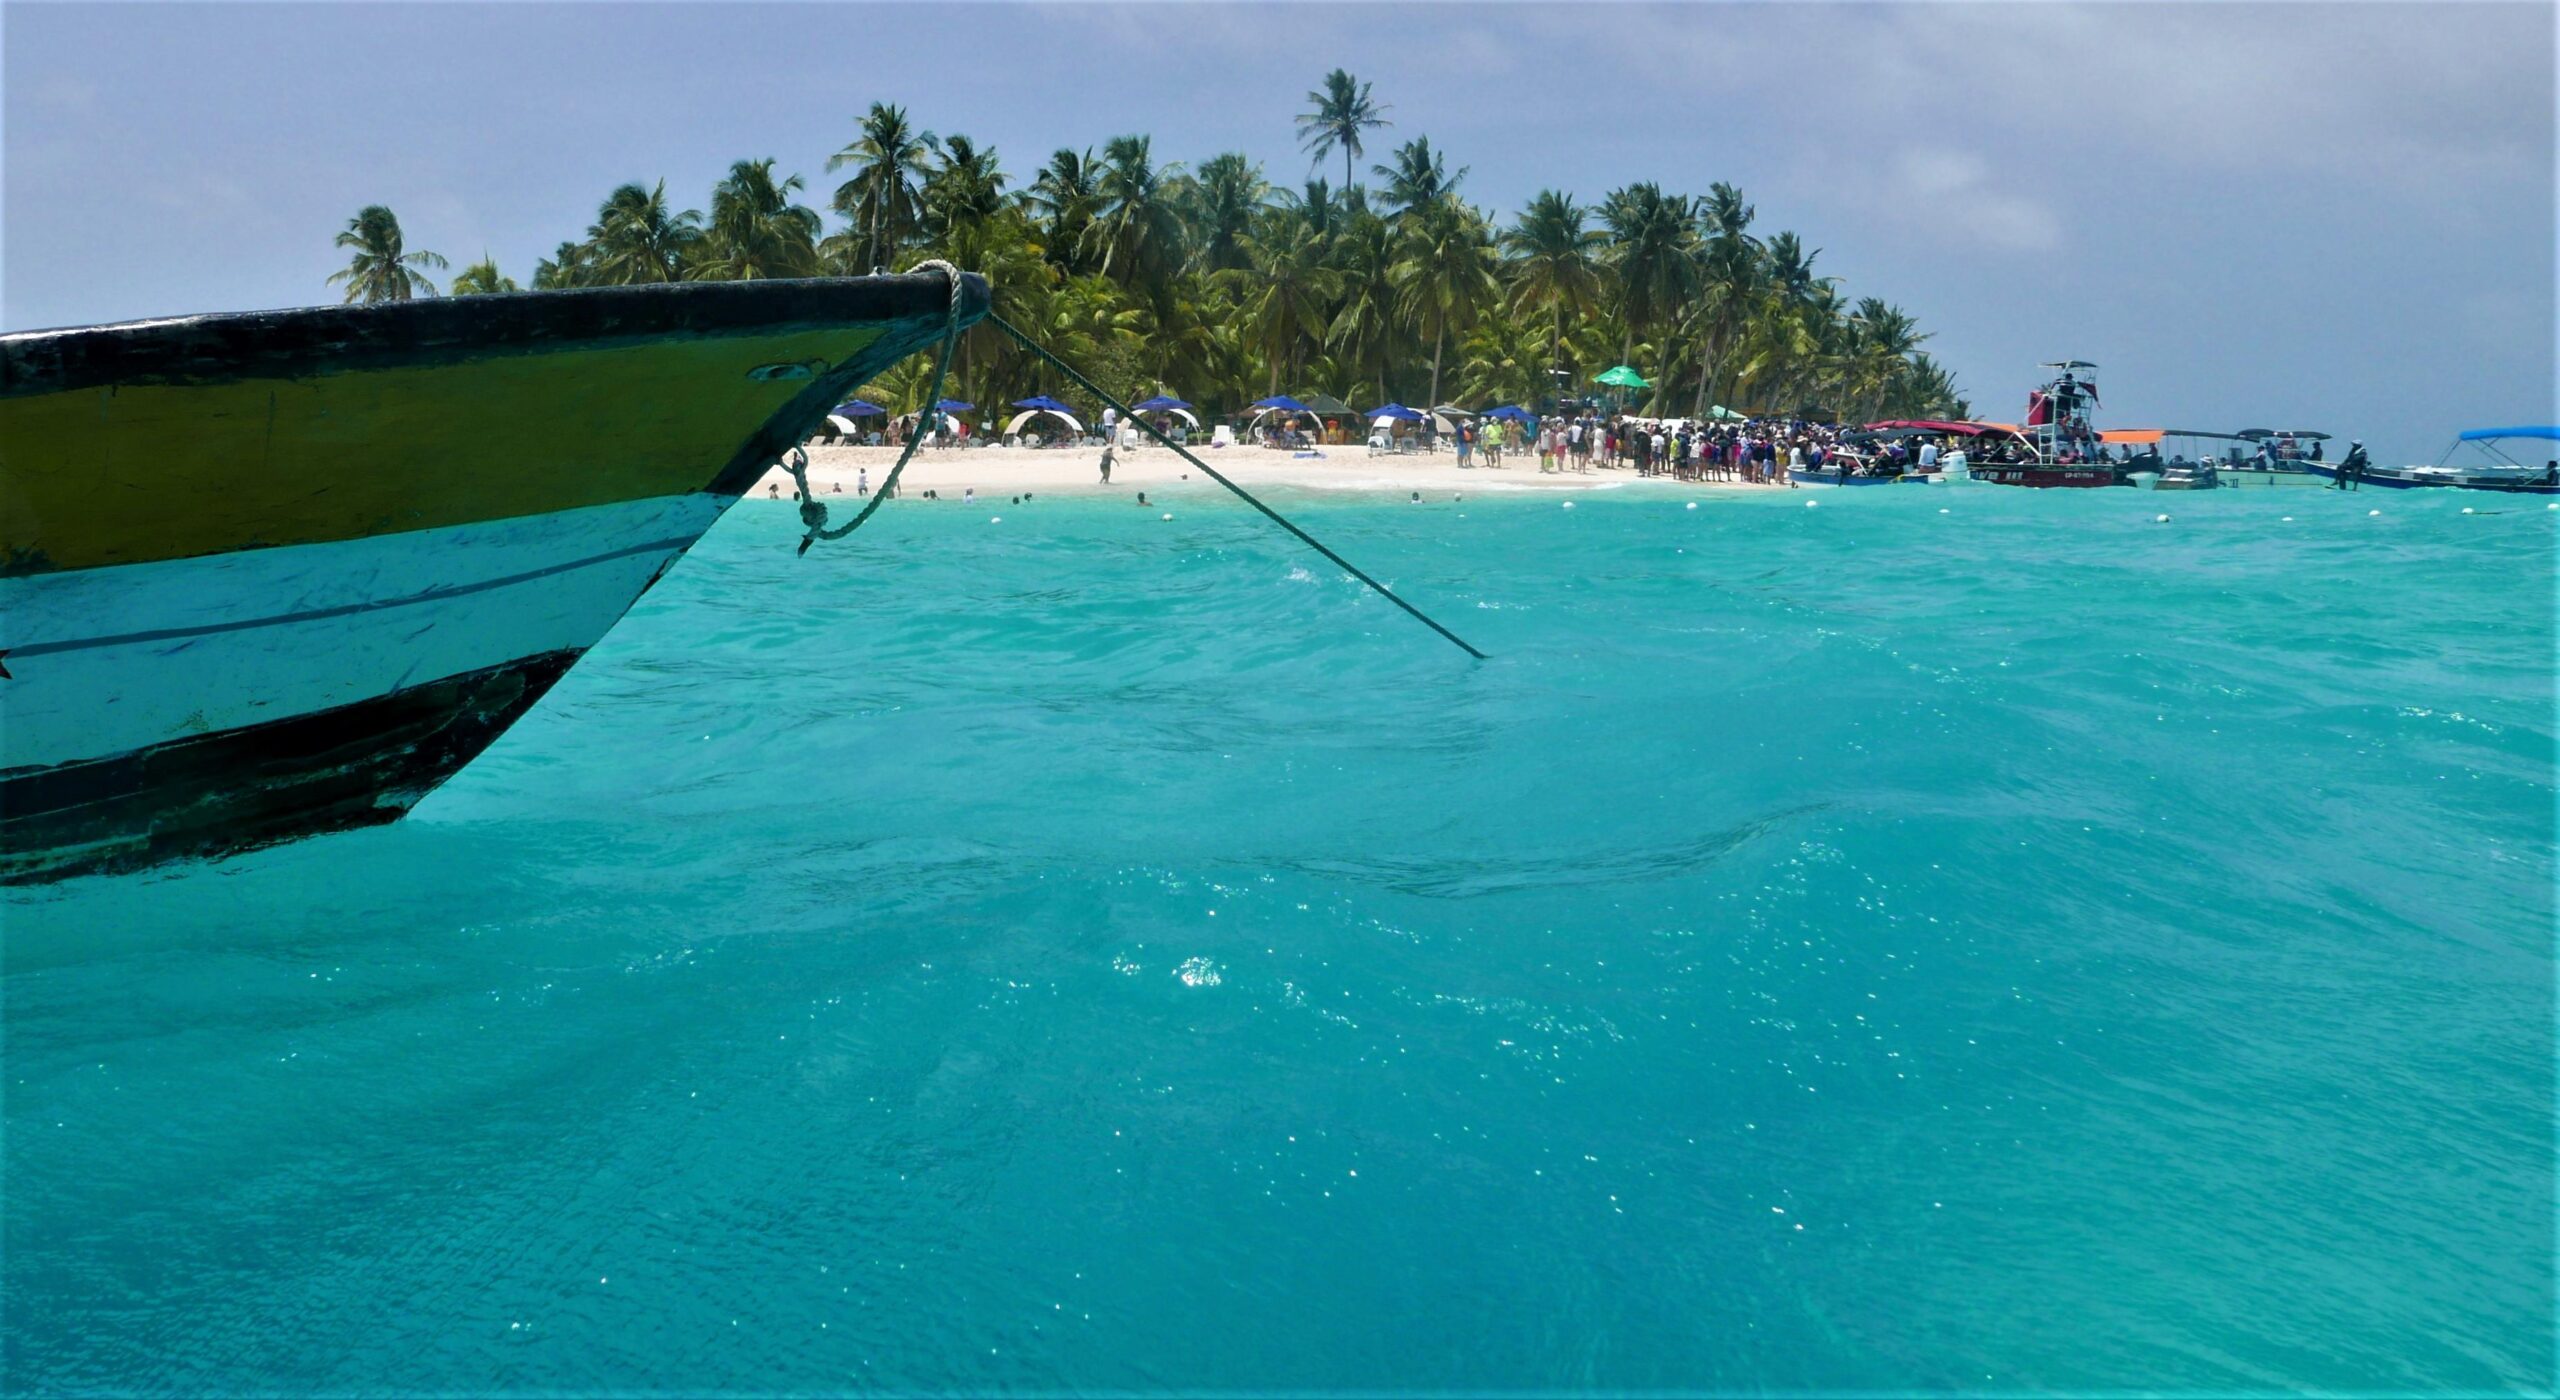 The tiny atoll of Johnny Cay is swamped with day trippers and has lost some of its magic.